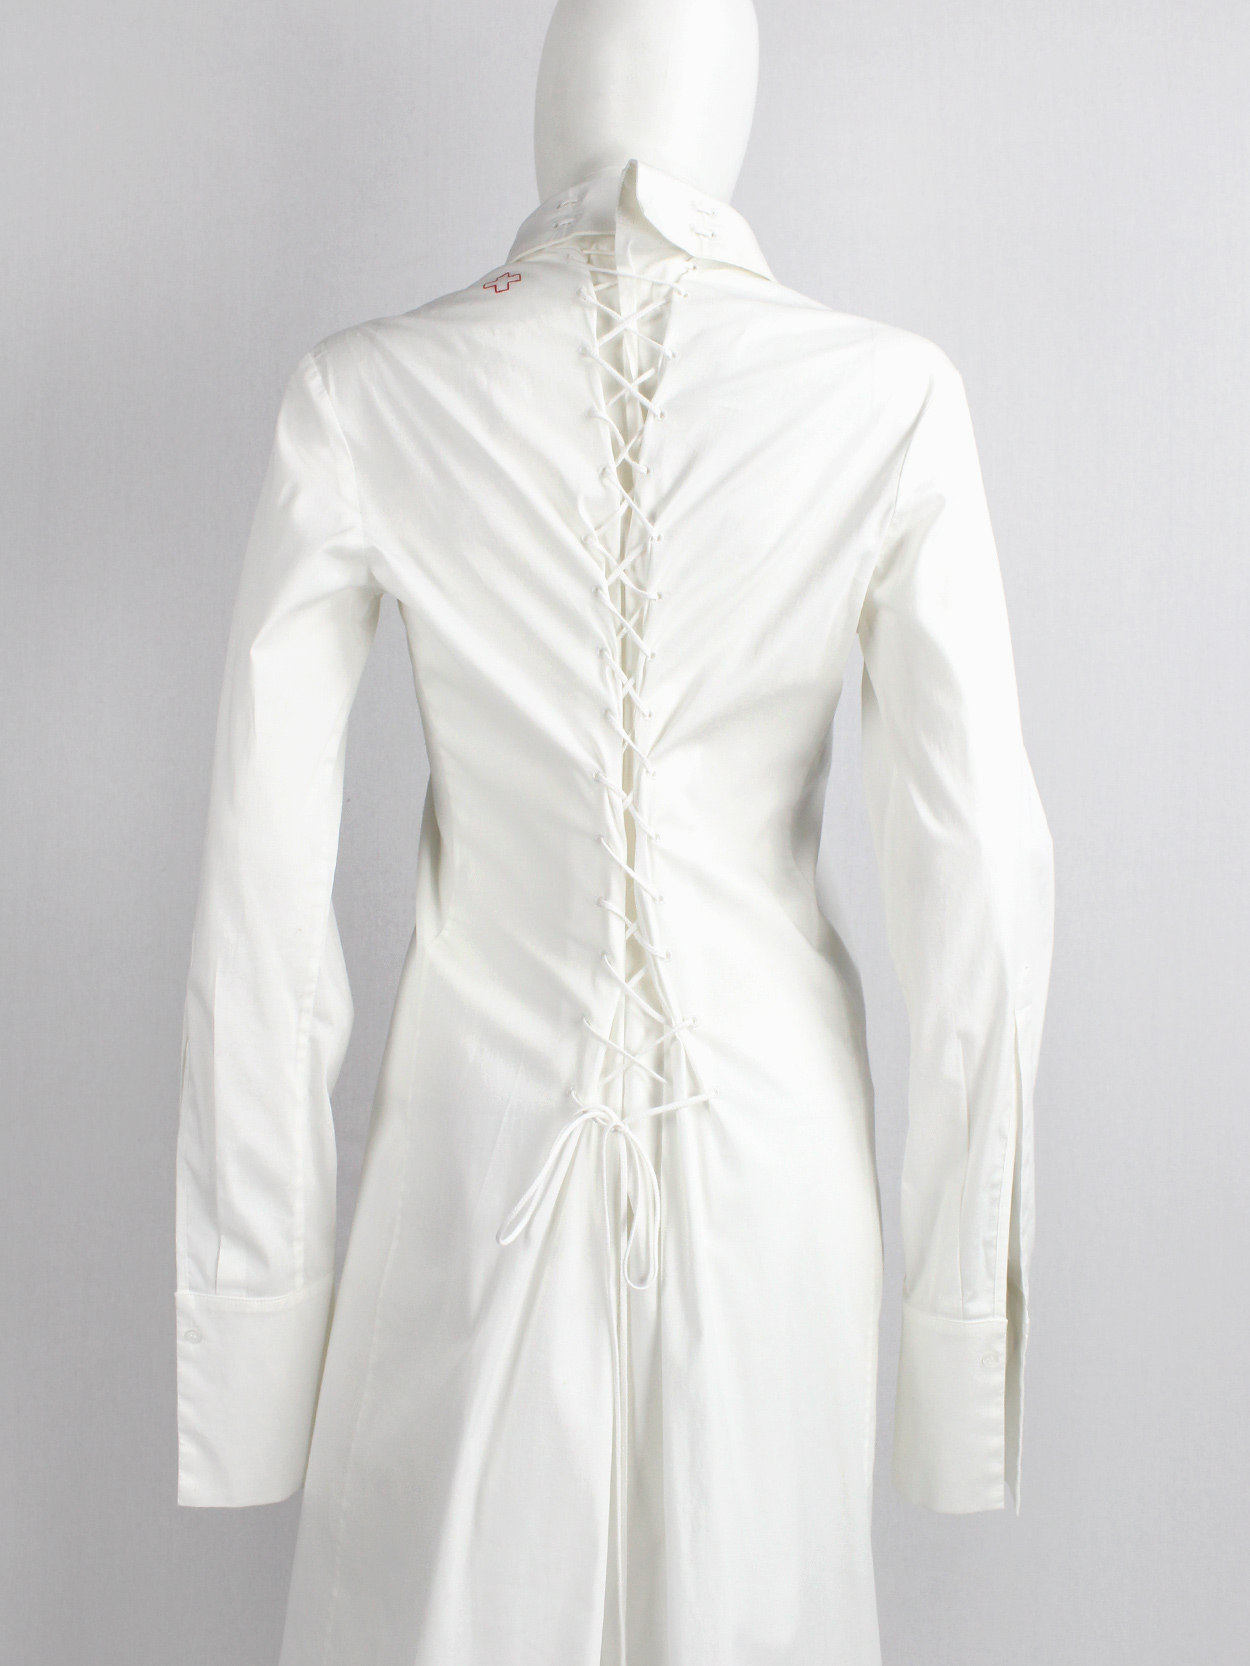 A F Vandevorst white maxi shirtdress with backlacing inspired by a straitjacket spring 1999 (7)